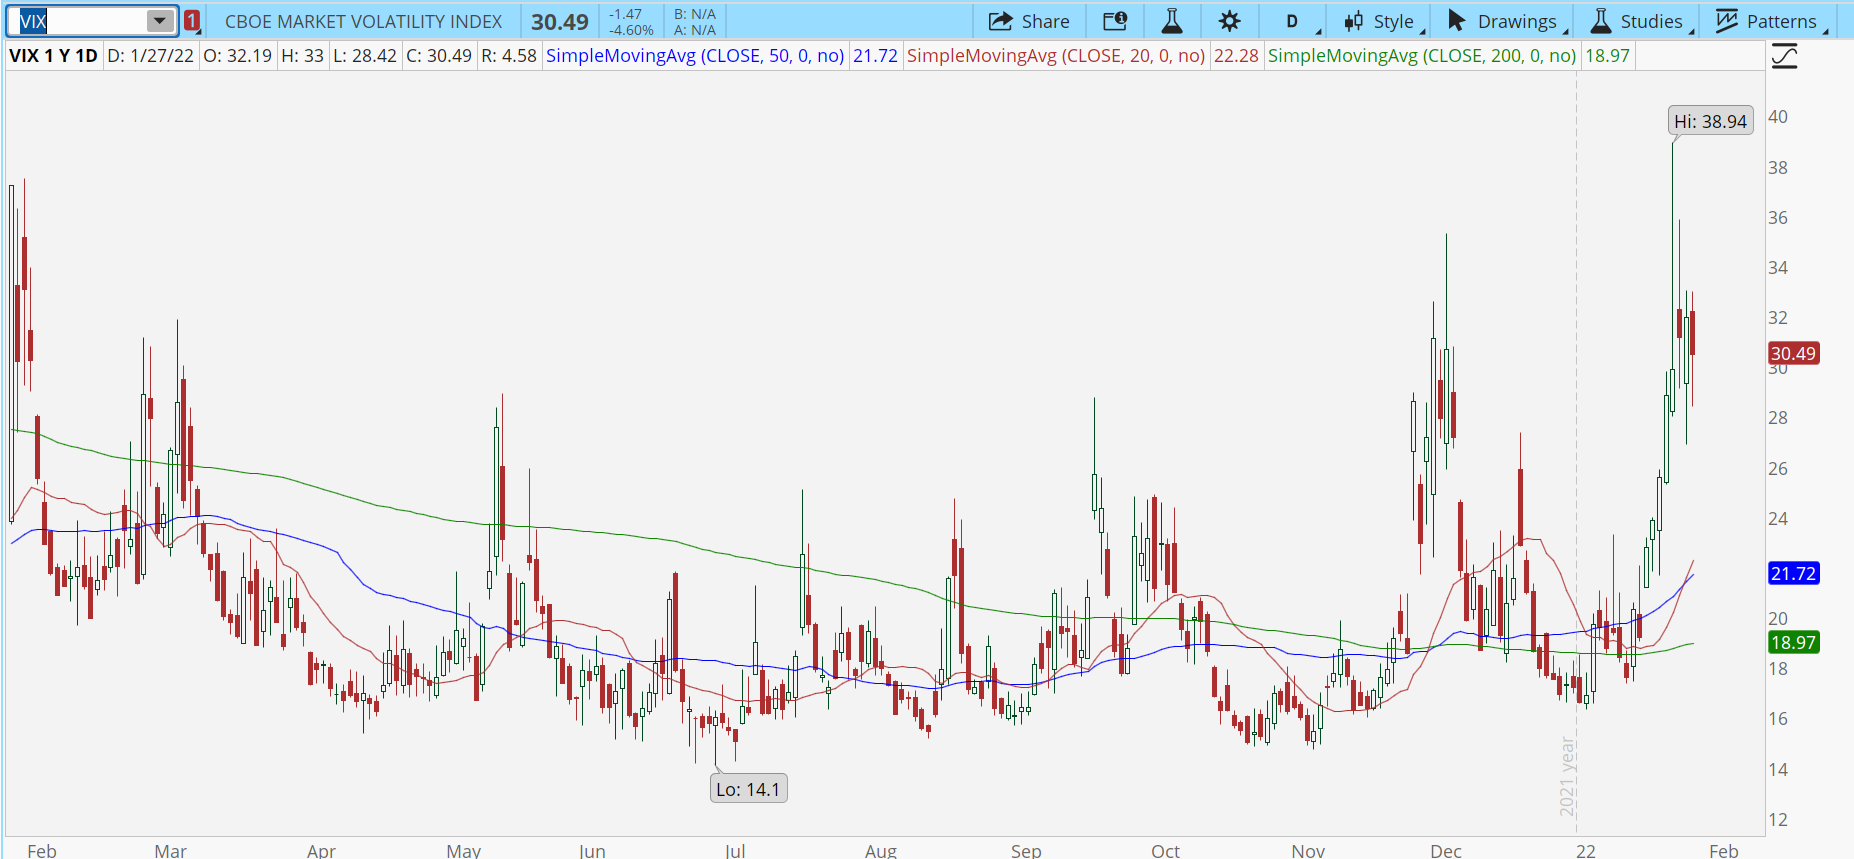 CBOE Volatility Index (VIX) with spike to overbought levels.